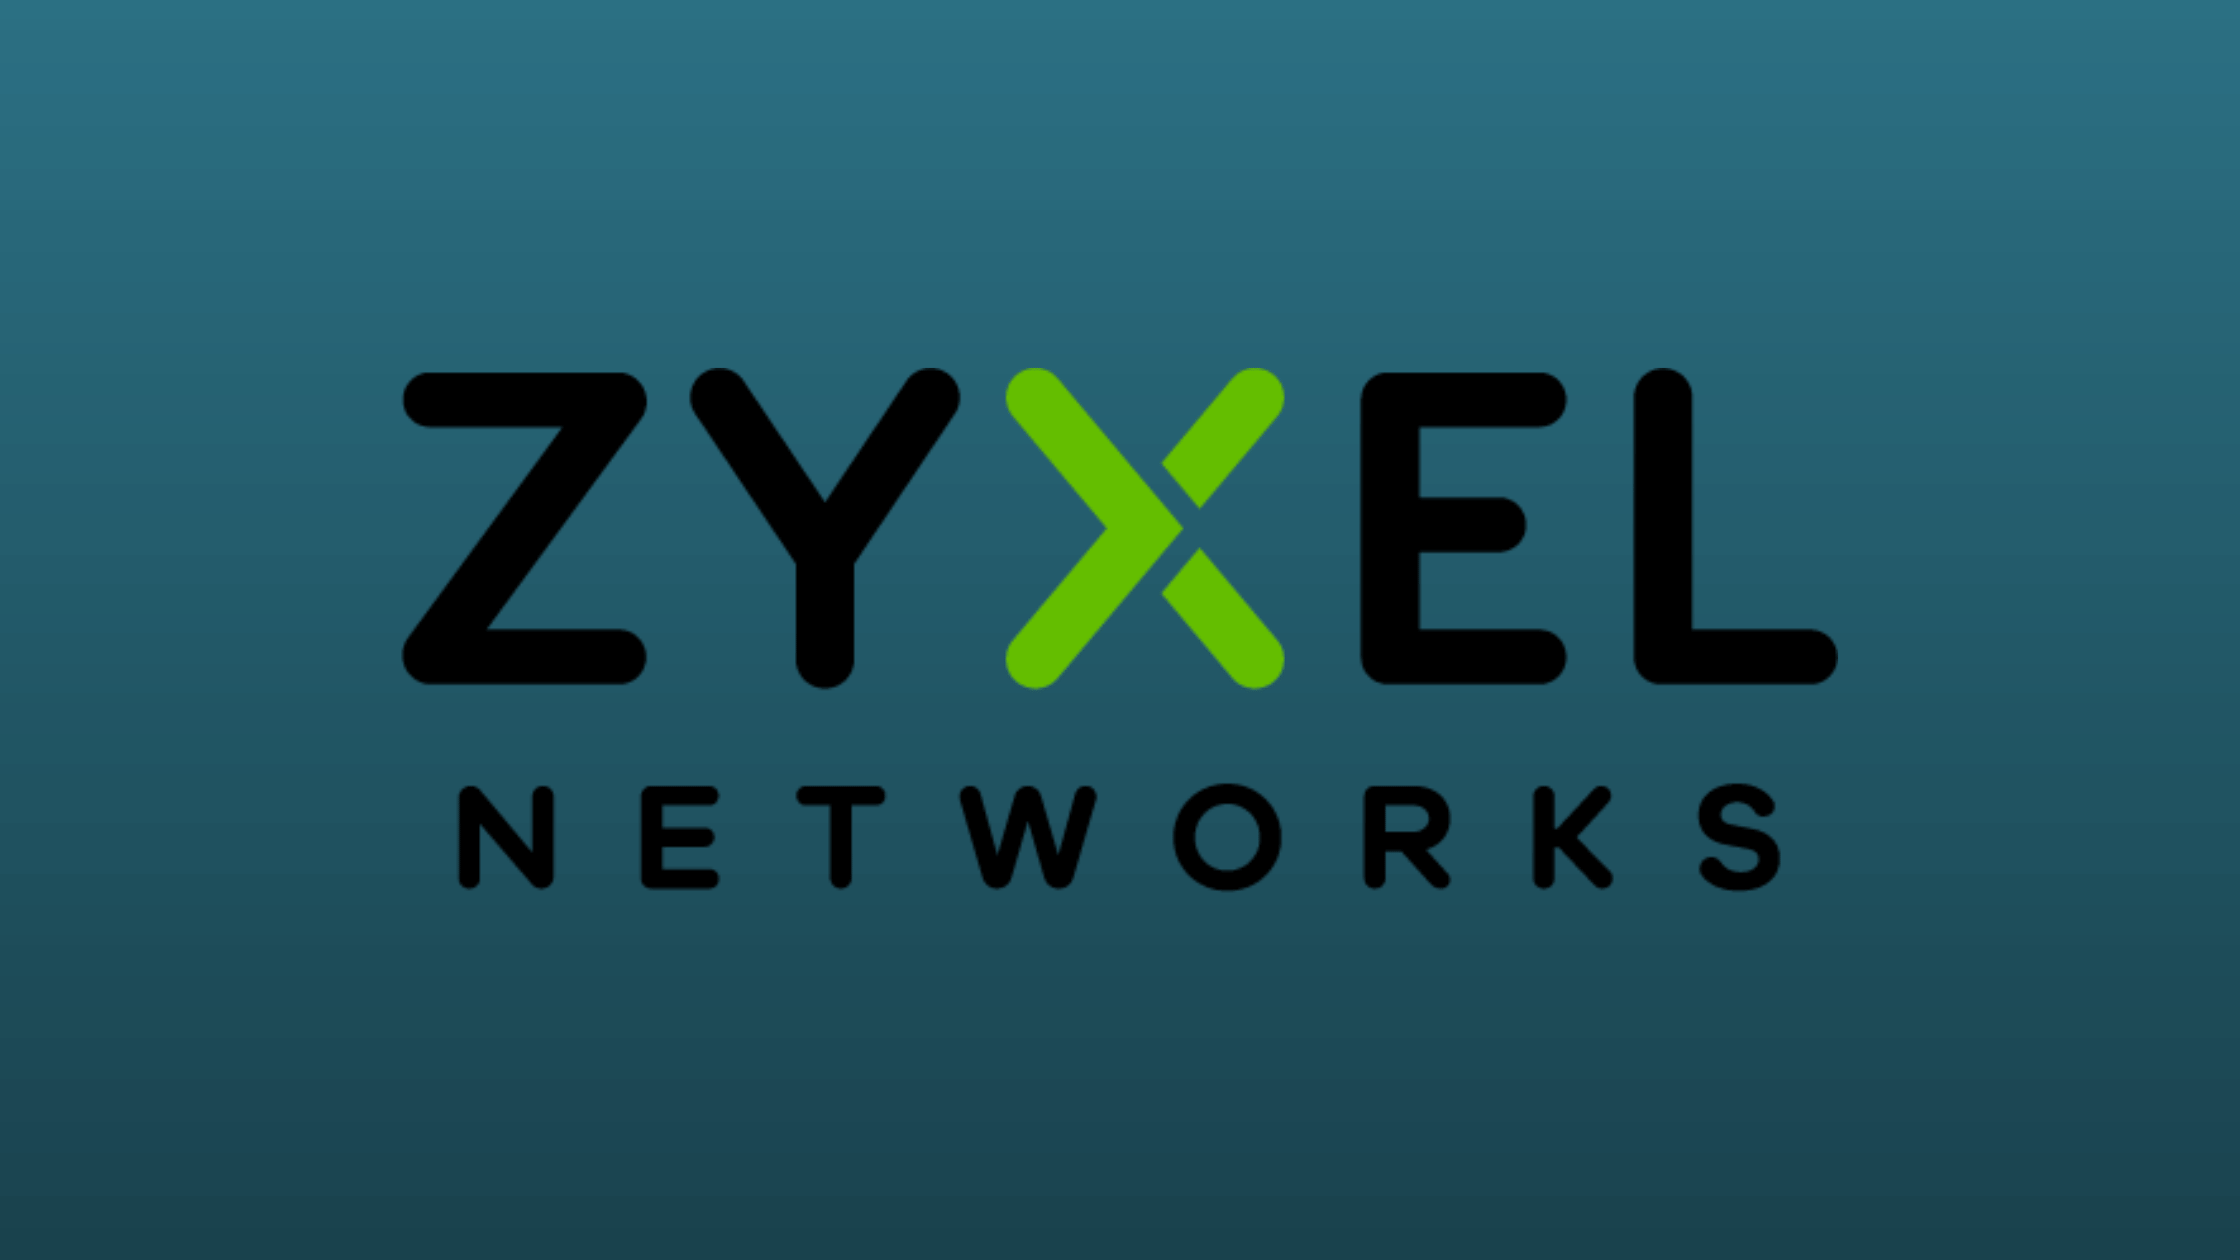 How To Fix Cve 2023 33009 And Cve 2023 33010 Critical Buffer Overflow Vulnerabilities In Zyxel Products